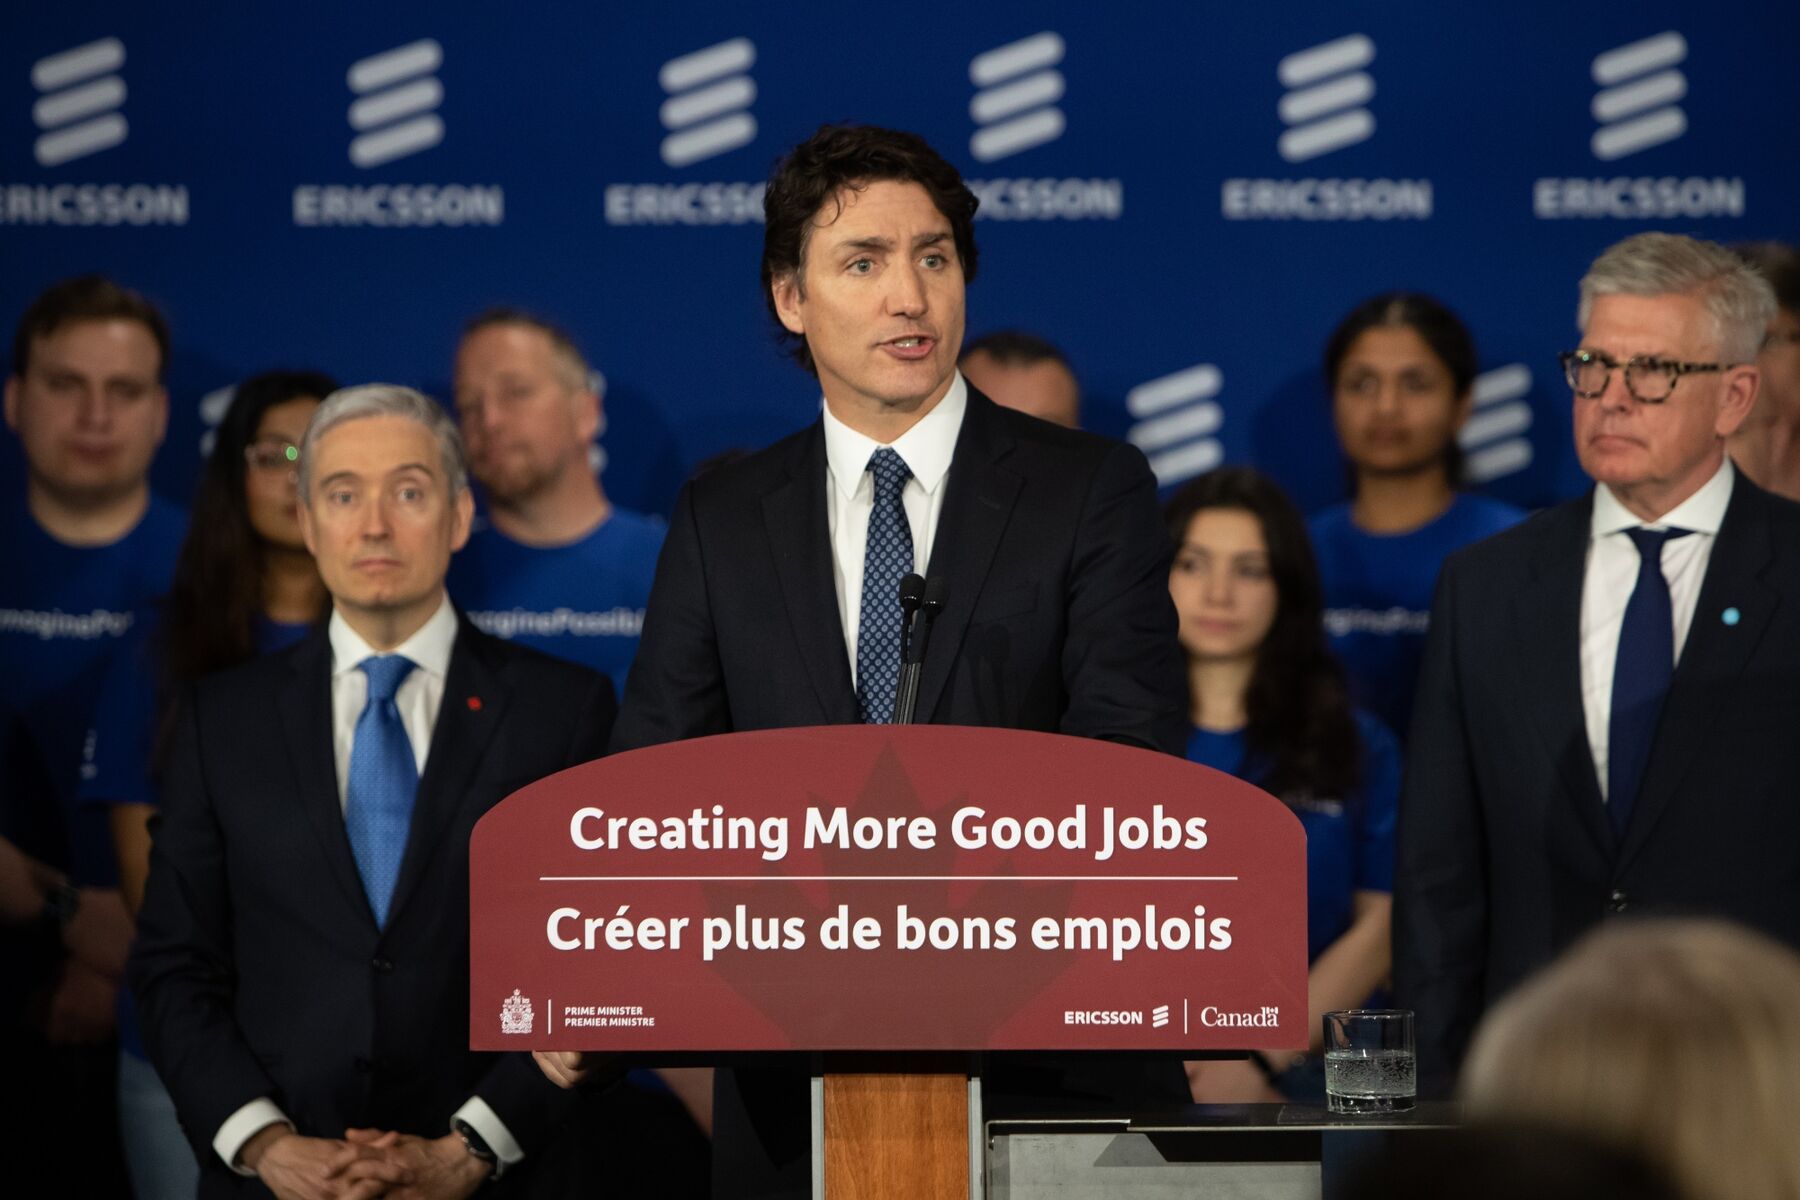 ev-incentives-canada-matched-biden-subsidies-to-win-volkswagen-battery